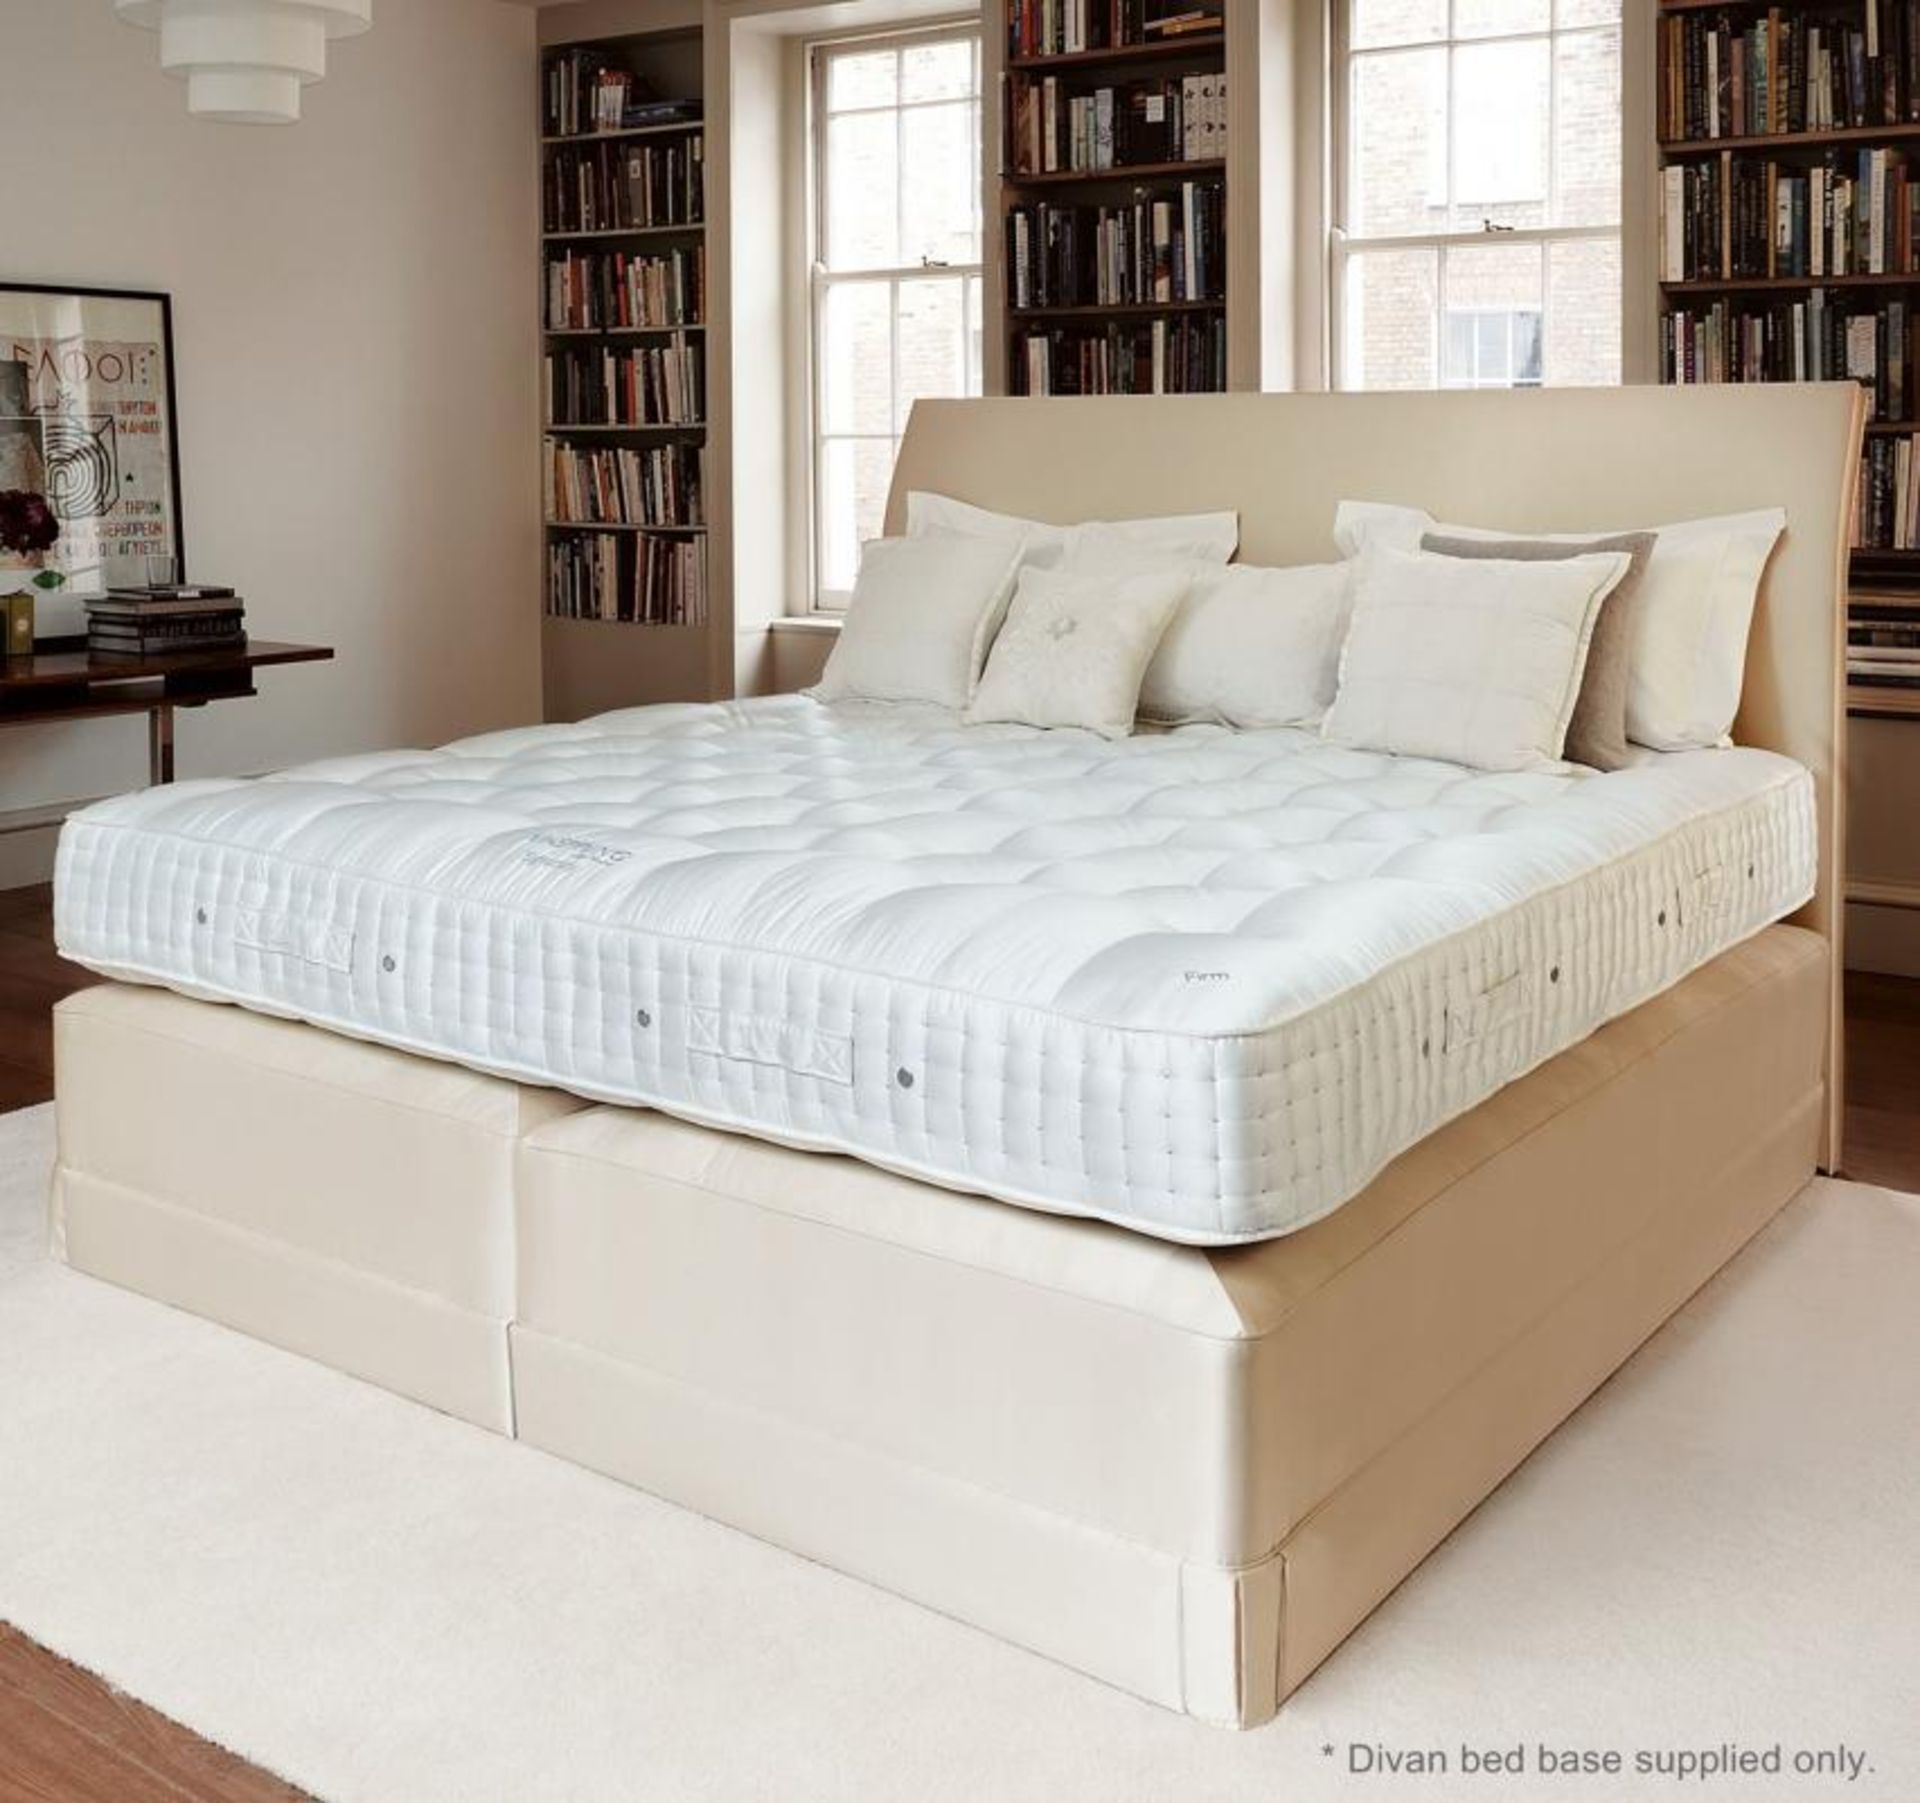 1 x VISPRING Deluxe Skirted Divan Bedbase In A Cream Faux Suede On Castors - Handcrafted In The UK -